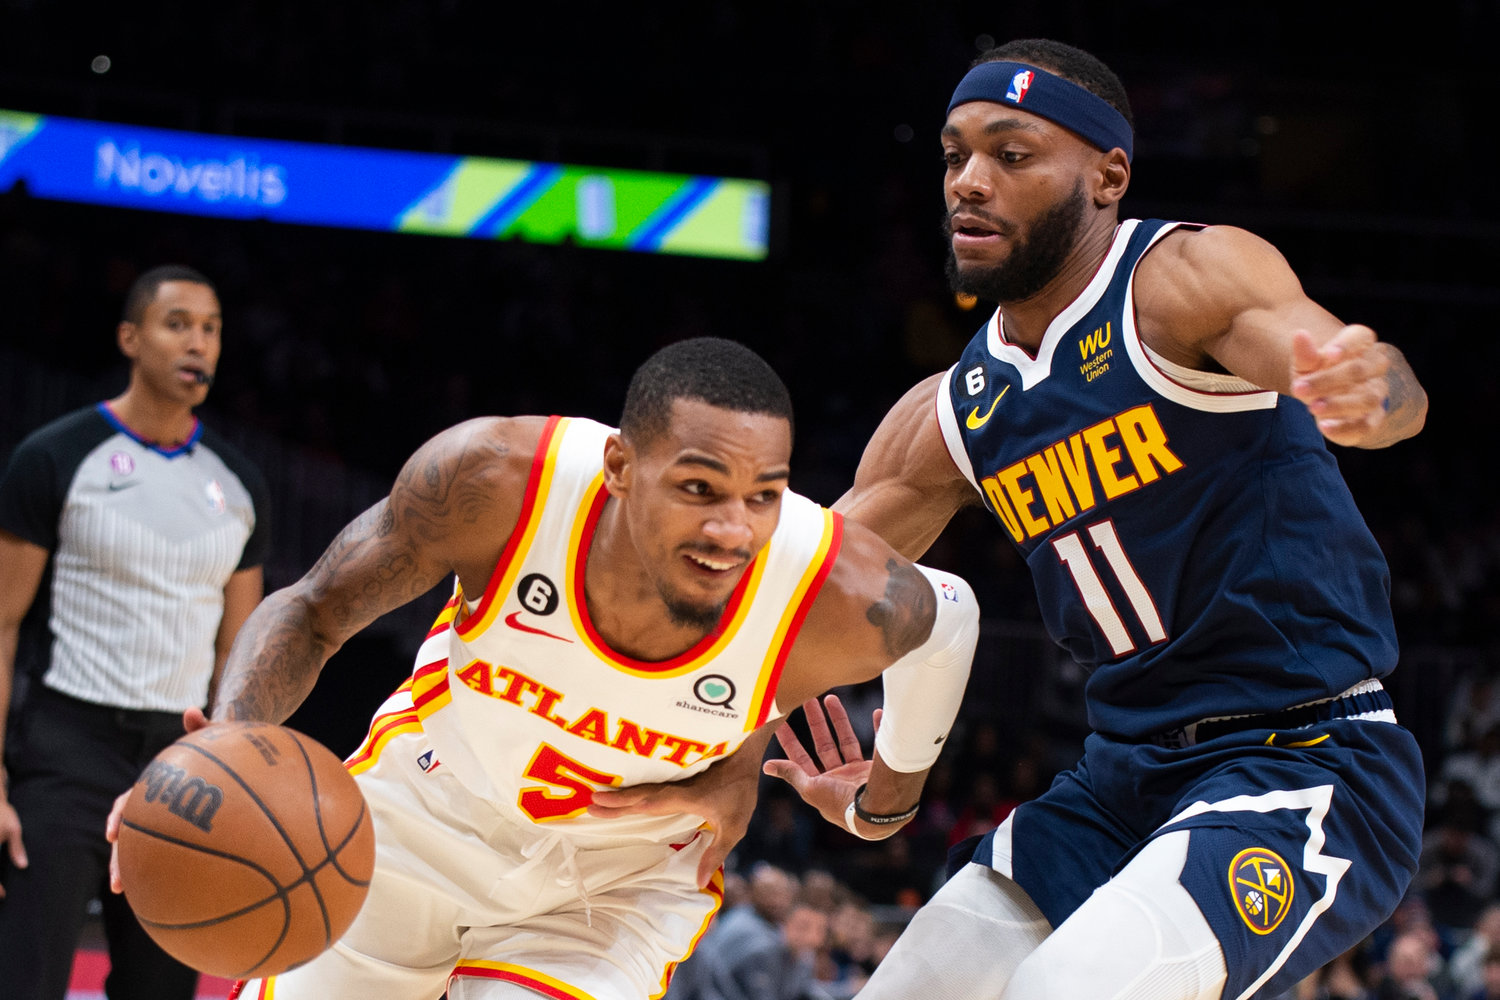 Atlanta Hawks guard Dejounte Murray drives to the basket past Denver Nuggets forward Bruce Brown during the first half of an NBA basketball game Friday, Dec. 2, 2022, in Atlanta. (AP Photo/Hakim Wright Sr.)